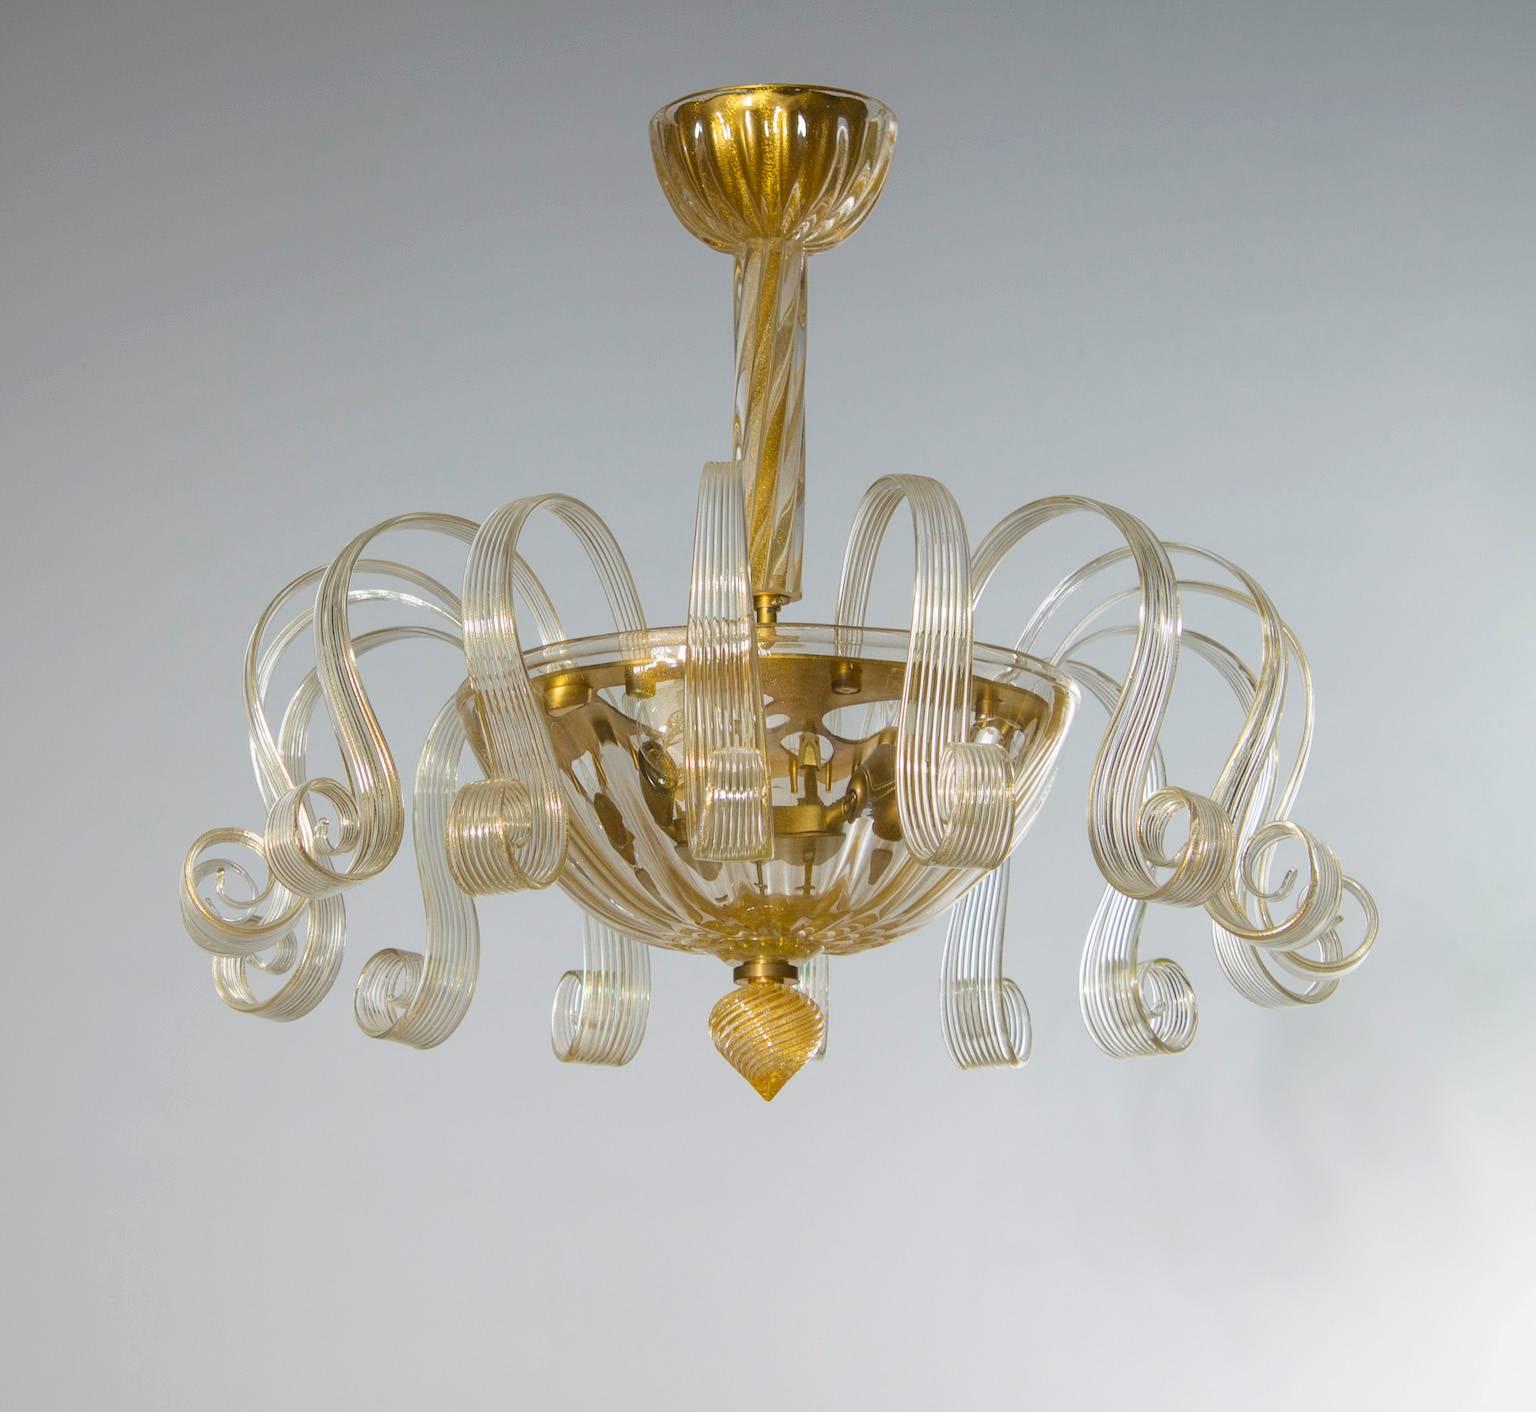 Italian Venetian Flush Mount in  blown Murano glass Gold 24-K Pastorals 1980s.
Beautiful Italian Venetian, Flush Mount, blown Murano glass, Gold 24-K Pastorals, 1980s, composed by sixteen pastorals, and from an elegant twisted stem in the middle,